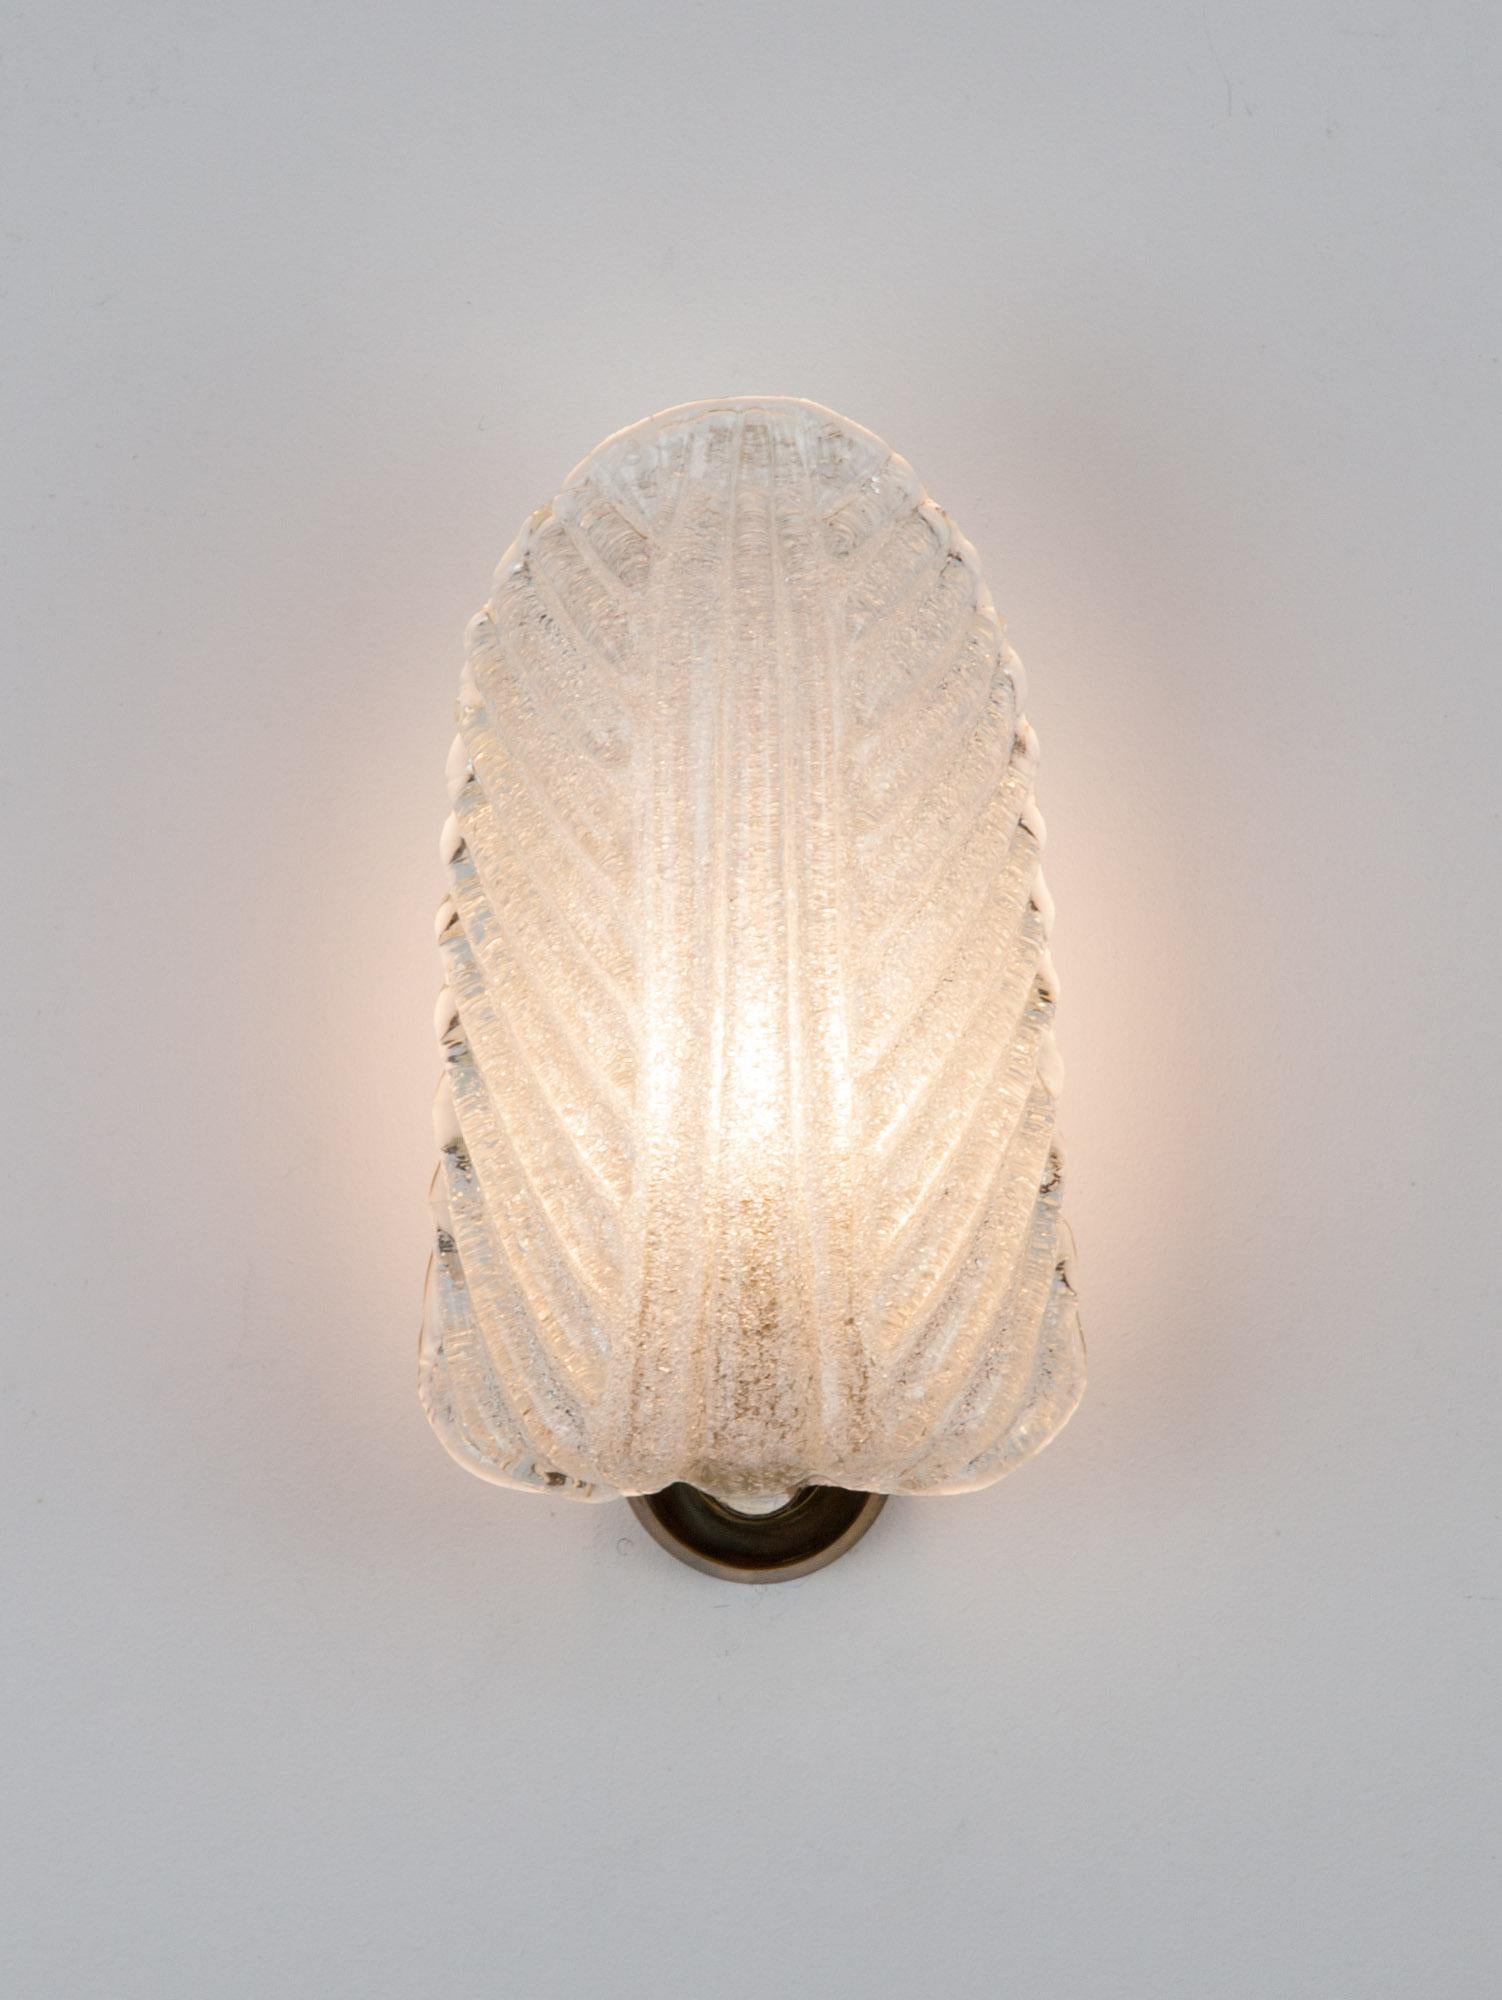 Vintage Italian Murano Glass Leaf Wall Light, Sconce, 1980s For Sale 4